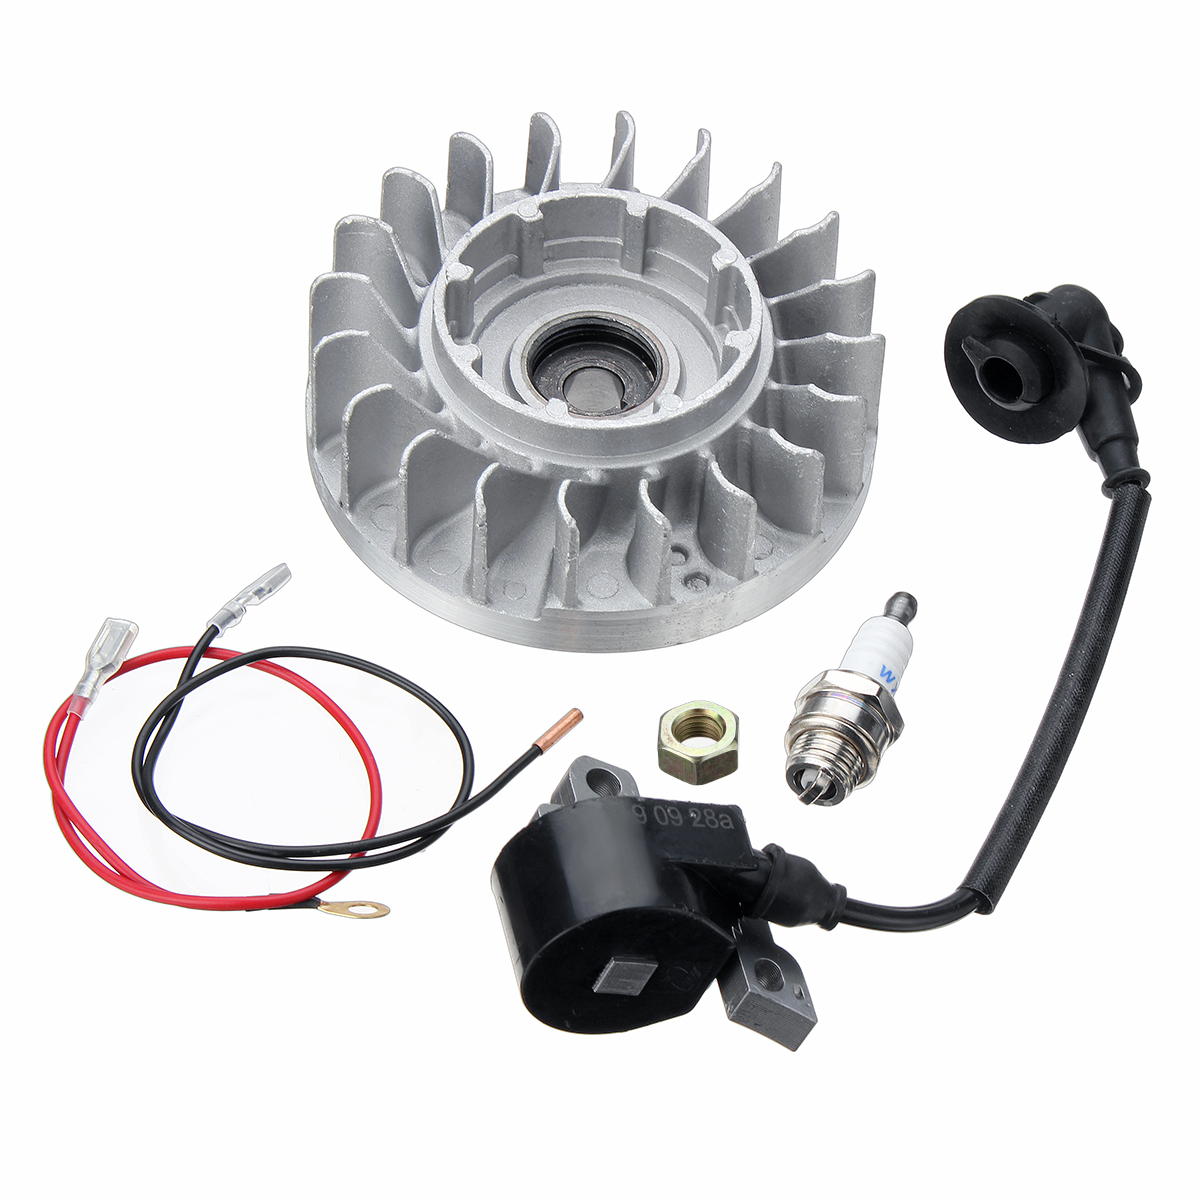 OEM-11224001217-Replacement-Flywheel-Coil-NGK-Plug-for-Stihl-Electric-Chainsaw-066-MS660-1631889-3